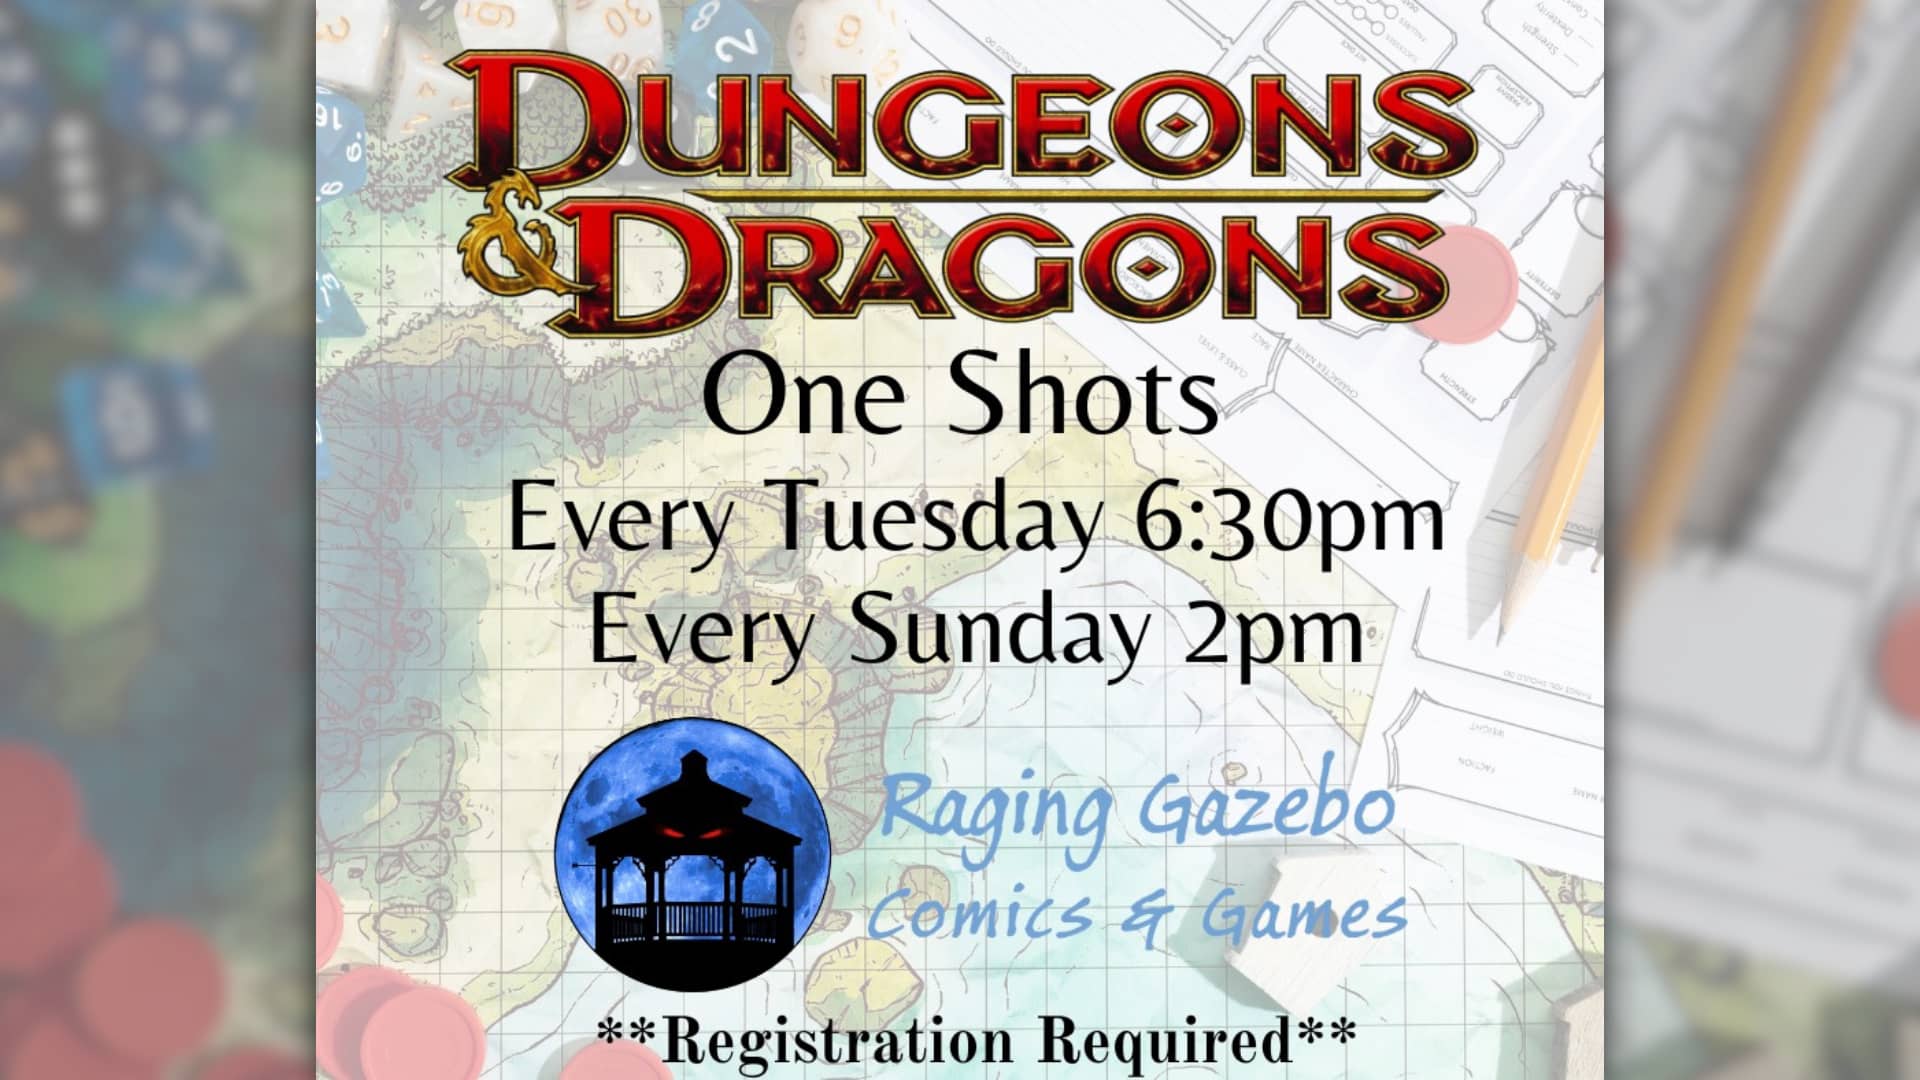 Dungeons & Dragons One Shots Every Tuesday and Wednesday